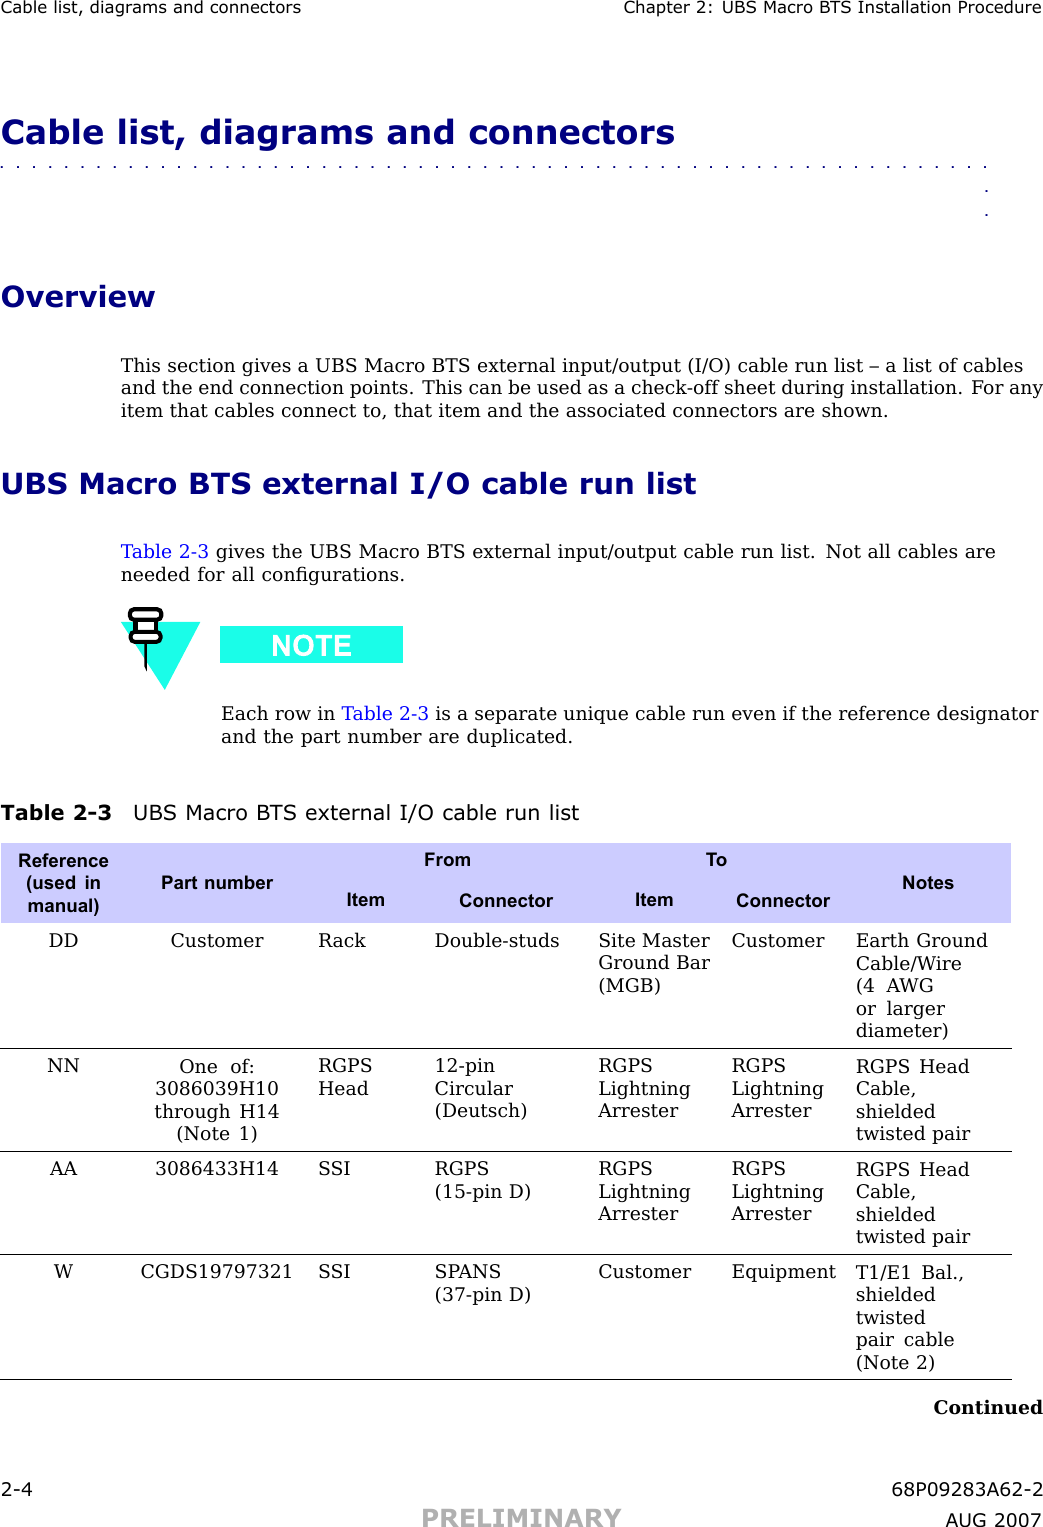 Cable list, diagr ams and connectors Chapter 2: UBS Macro B T S Installation ProcedureCable list, diagrams and connectors■■■■■■■■■■■■■■■■■■■■■■■■■■■■■■■■■■■■■■■■■■■■■■■■■■■■■■■■■■■■■■■■OverviewThis section gives a UBS Macro BTS external input/output (I/O) cable run list – a list of cablesand the end connection points. This can be used as a check -off sheet during installation. F or anyitem that cables connect to, that item and the associated connectors are shown.UBS Macro BTS external I/O cable run listT able 2 -3 gives the UBS Macro BTS external input/output cable run list. Not all cables areneeded for all conﬁgurations.Each row in T able 2 -3 is a separate unique cable run even if the reference designatorand the part number are duplicated.Table 2 -3 UBS Macro B T S external I/O cable run listFrom T oReference(used inmanual)Part numberItemConnectorItemConnectorNotesDDCustomerR ack Double-studsSite MasterGround Bar(MGB)CustomerEarth GroundCable/W ire(4 A WGor largerdiameter)NNOne of:3086039H10through H14(Note 1)RGPSHead12-pinCircular(Deutsch)RGPSLightningArresterRGPSLightningArresterRGPS HeadCable,shieldedtwisted pairAA3086433H14 S SI RGPS(15-pin D)RGPSLightningArresterRGPSLightningArresterRGPS HeadCable,shieldedtwisted pairWCGDS19797321 S SI SP ANS(37-pin D)Customer EquipmentT1/E1 Bal.,shieldedtwistedpair cable(Note 2)Continued2 -4 68P09283A62 -2PRELIMINARY A UG 2007